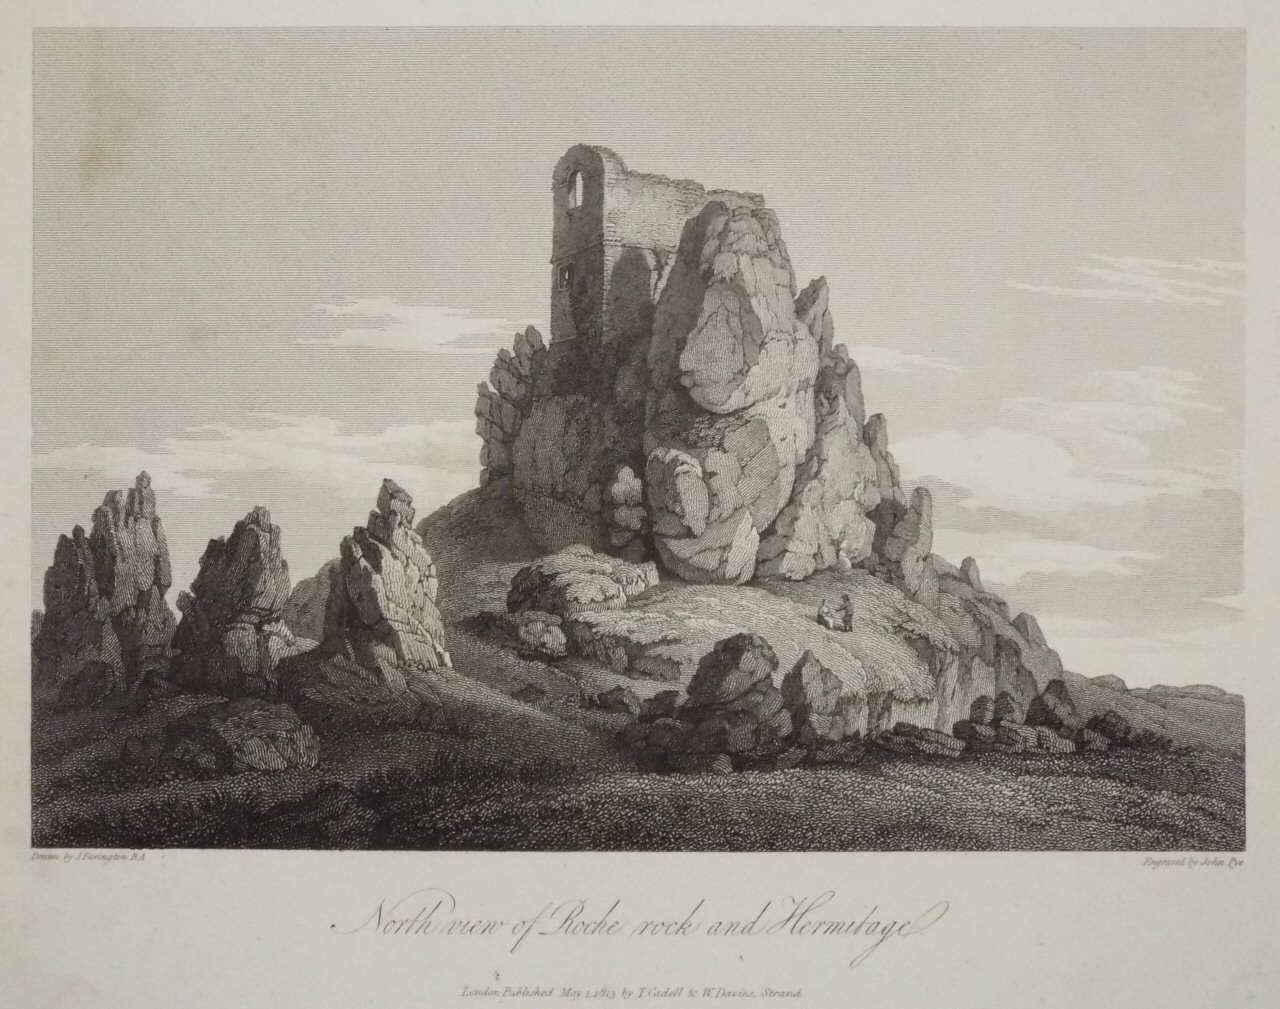 Print - North View of Roche rock and Hermitage. - Pye